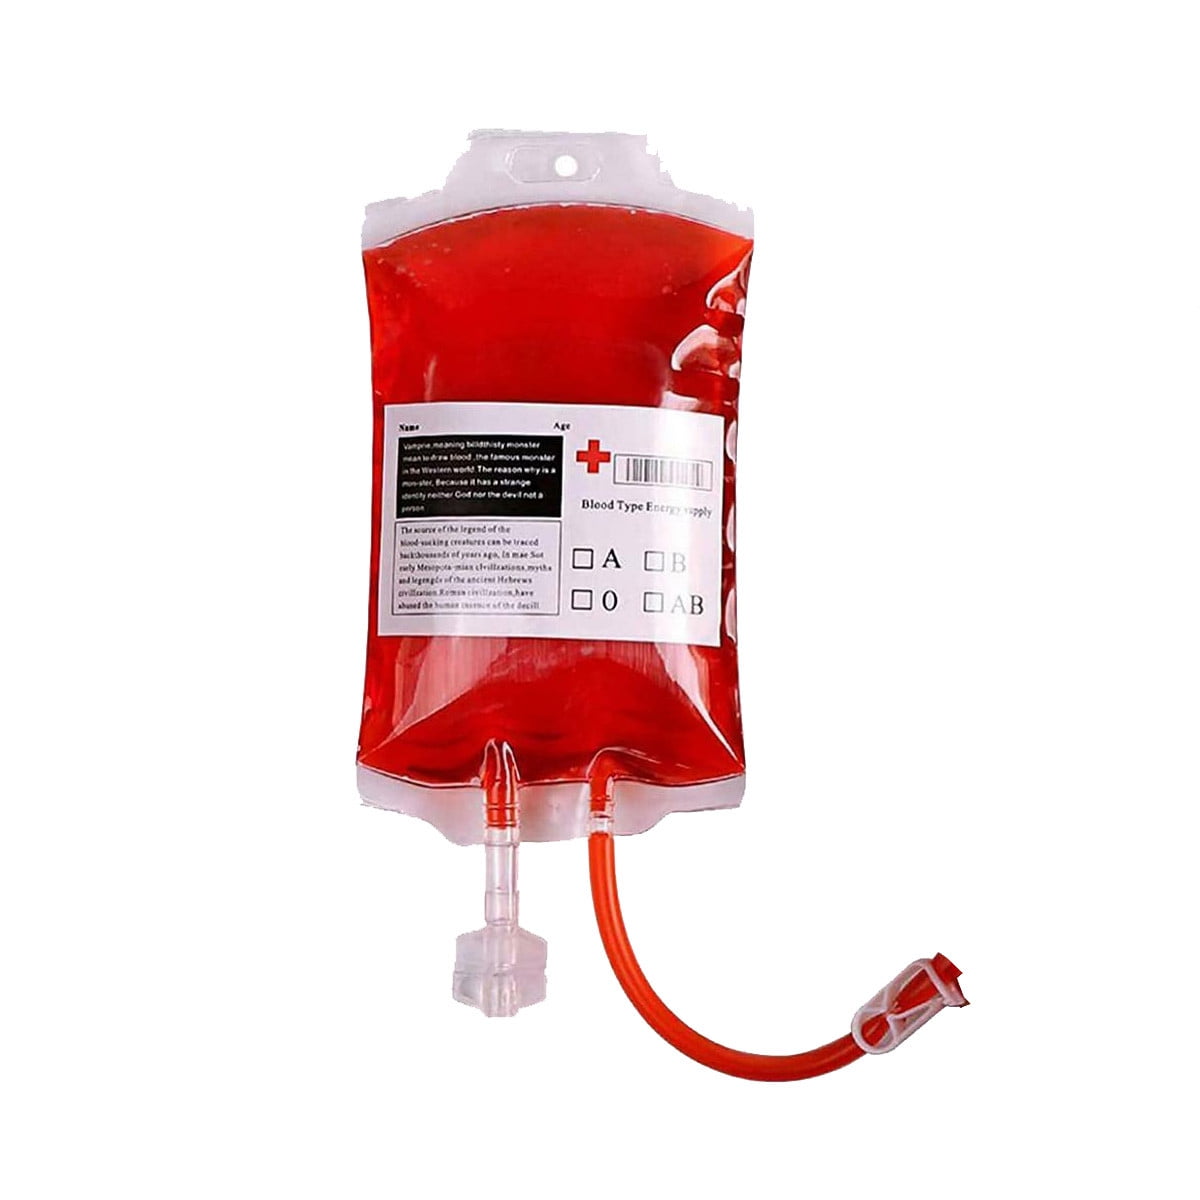 10PCS Reusable IV Blood Bags Halloween Haunted House Drink Container Props US 